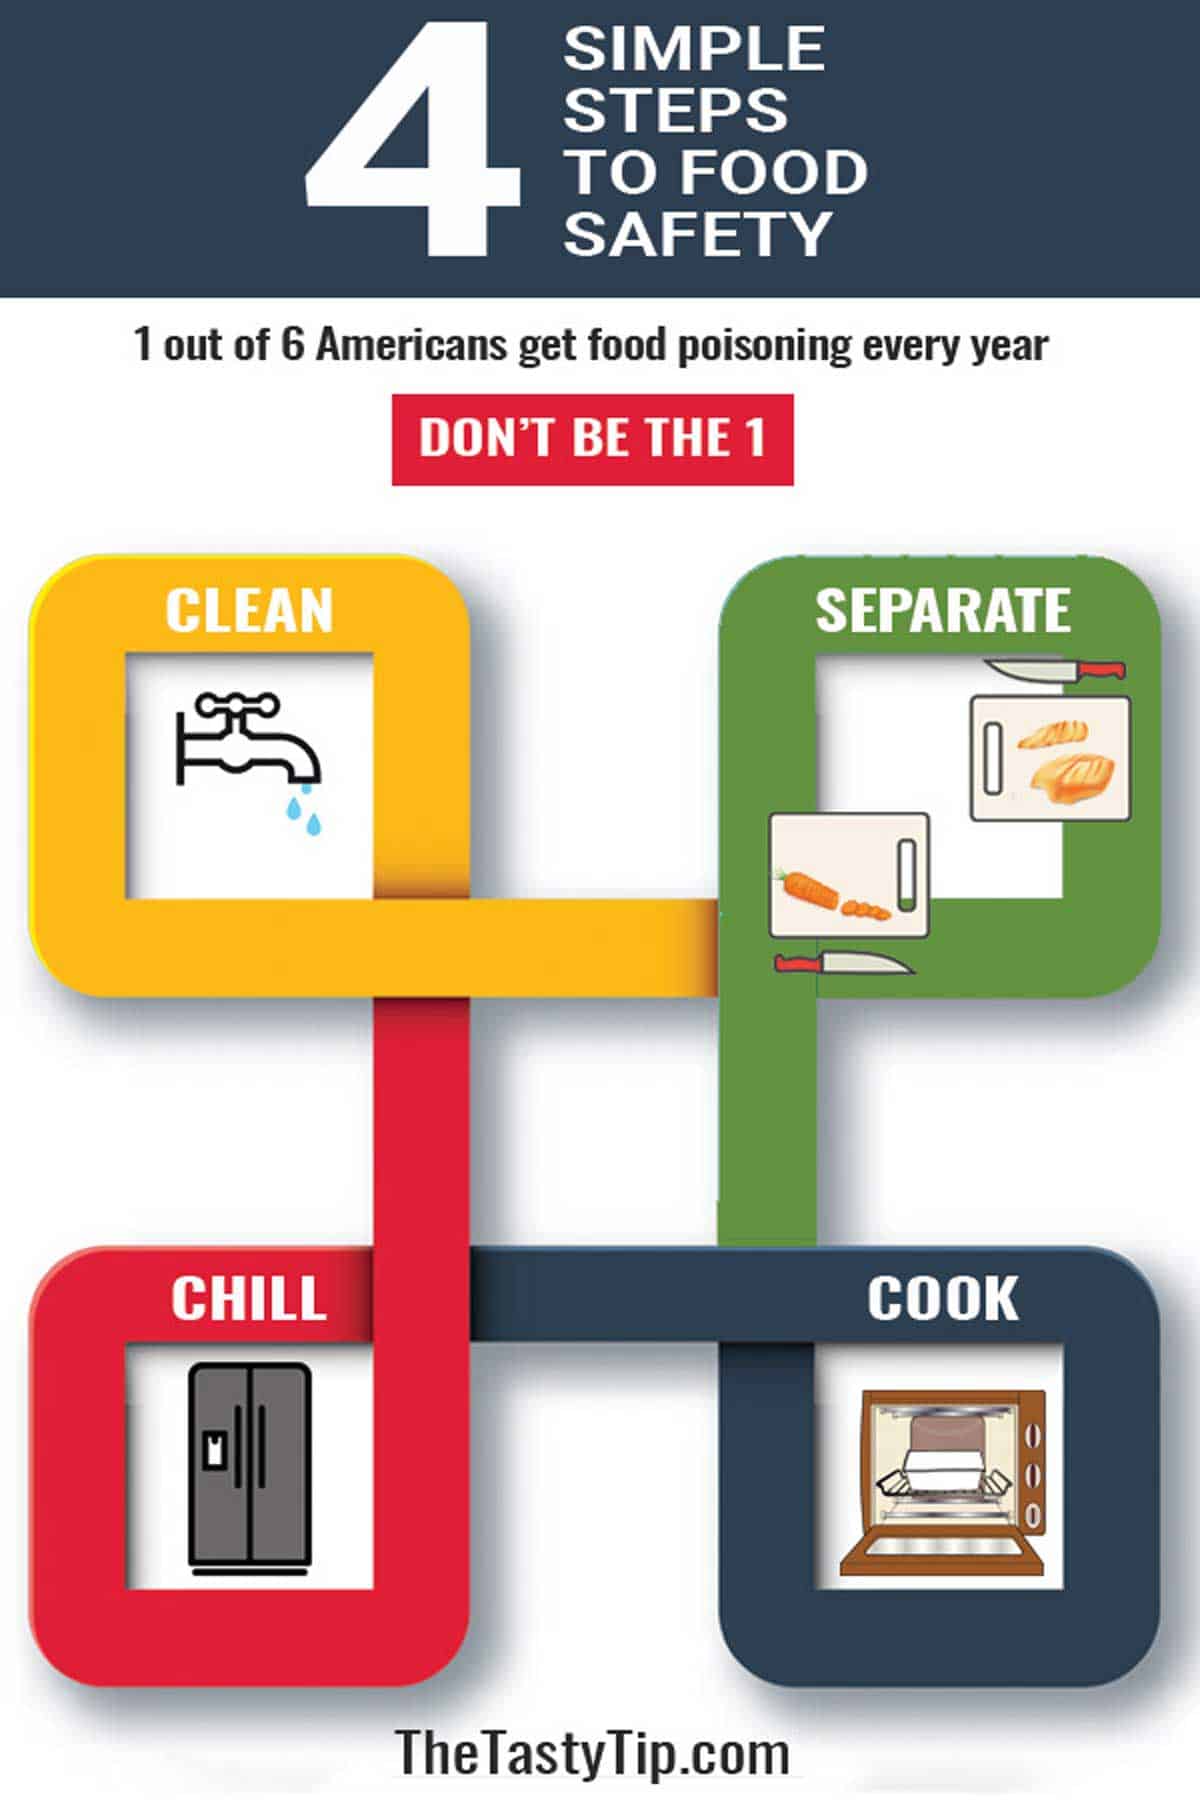 Illustration of the 4 steps of food safety: clean, separate, chill, and cook.